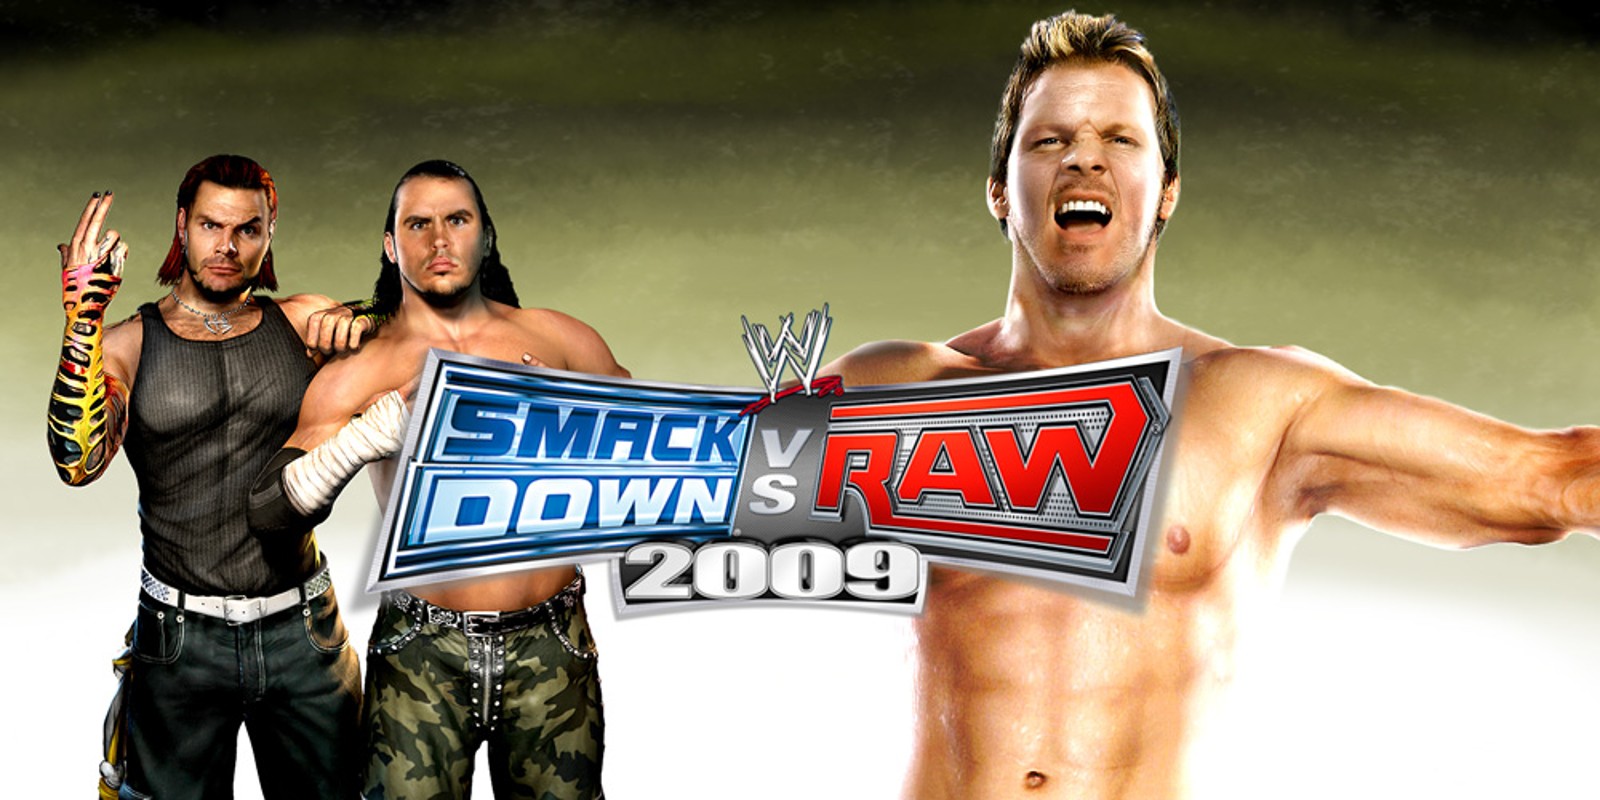 WWE SmackDown vs. Raw 2009 cover image